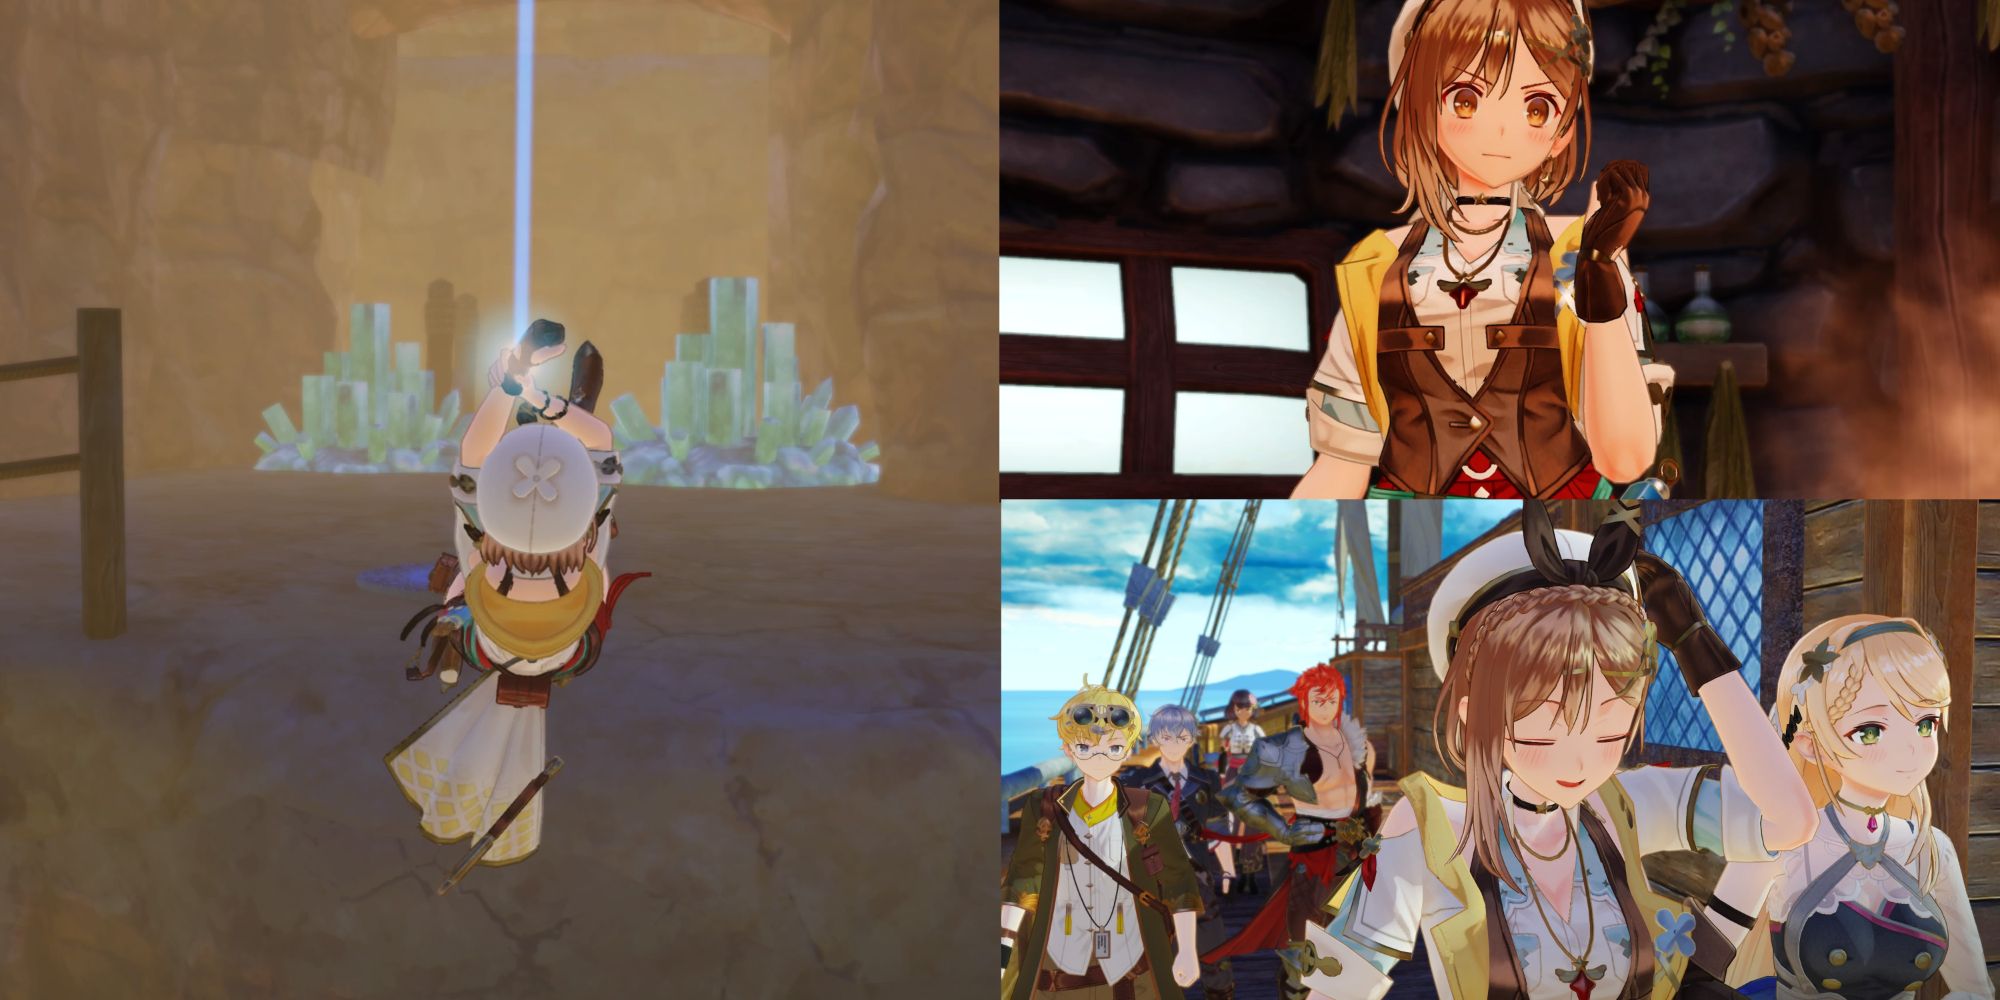 A collage of images from Atelier Ryza 3: Alchemist Of The End & The Secret Key. The leftmost image showcases Ryza swinging over a gap with her Emerald Band Survival Tool. The top right image is a determined Ryza figuring out a tricky Alchemy Formula. The bottom right is of Ryza and her friends traveling to a new city on a boat, enjoying their time together as they set out on another adventure.